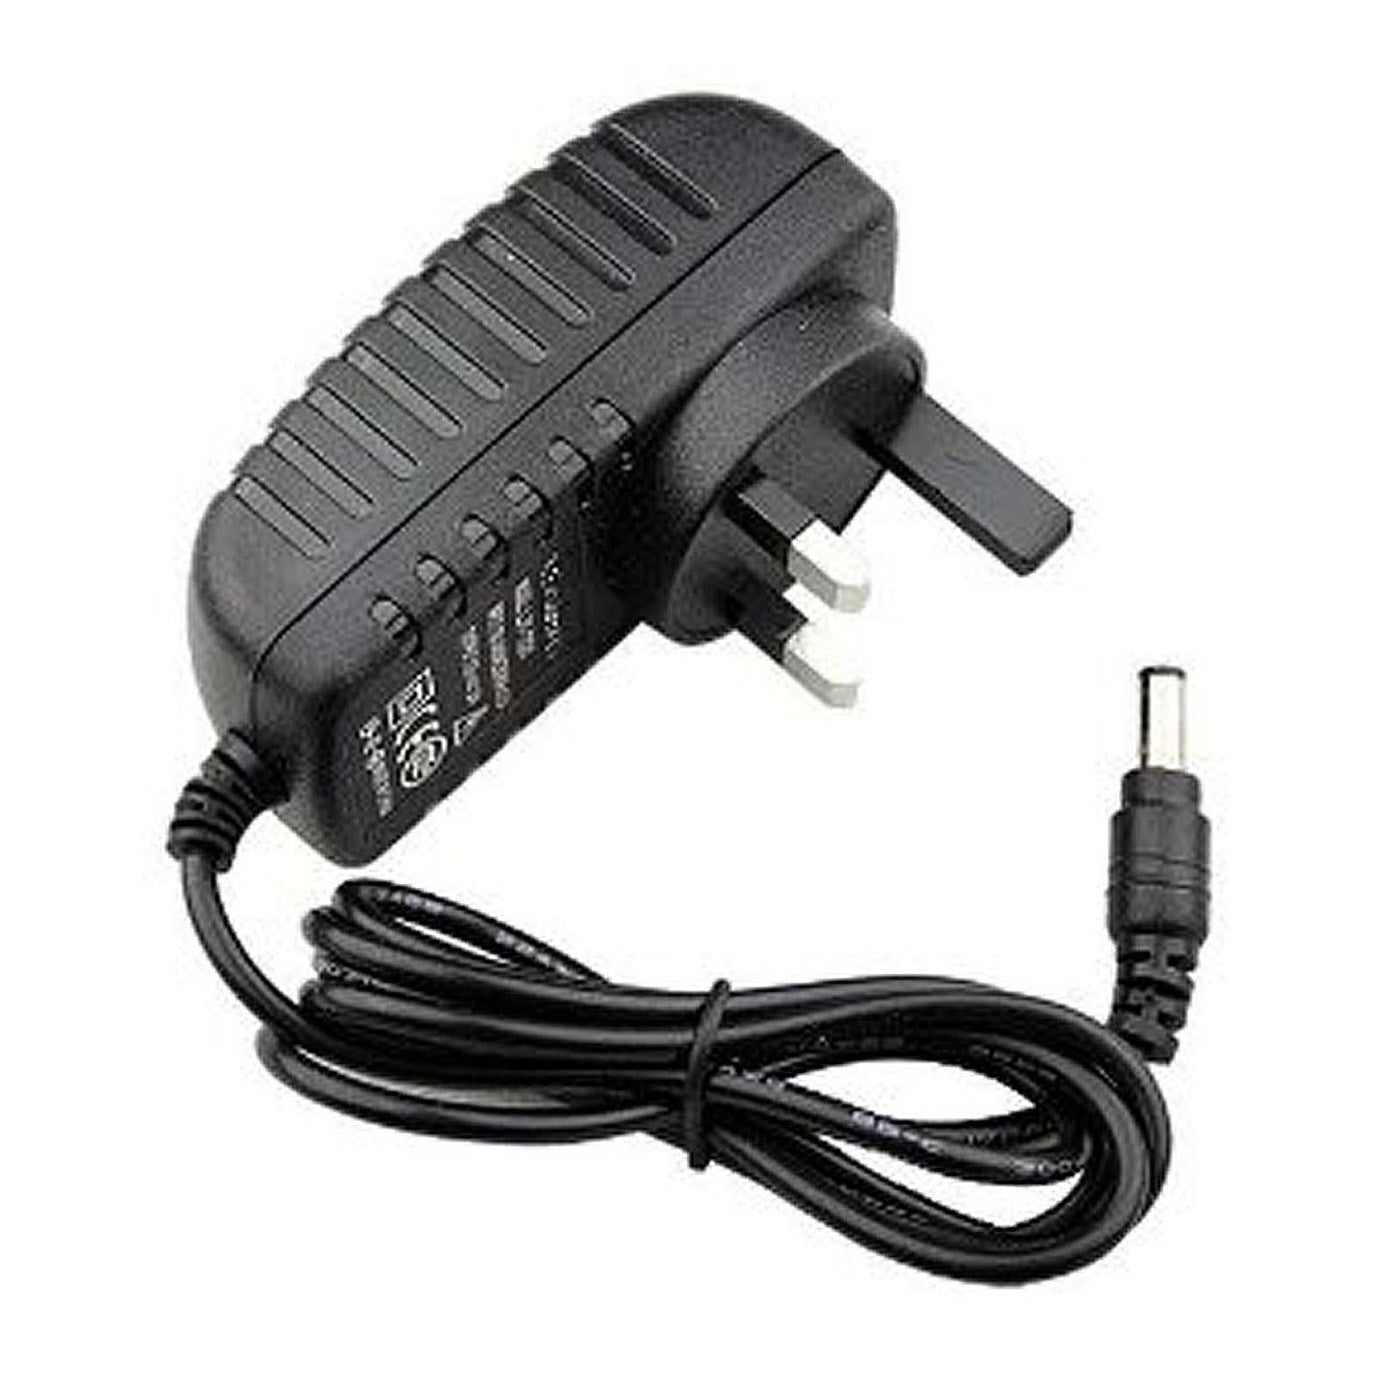 230V power adapter (12V / 2A) with DC connector and 2.5 m cable